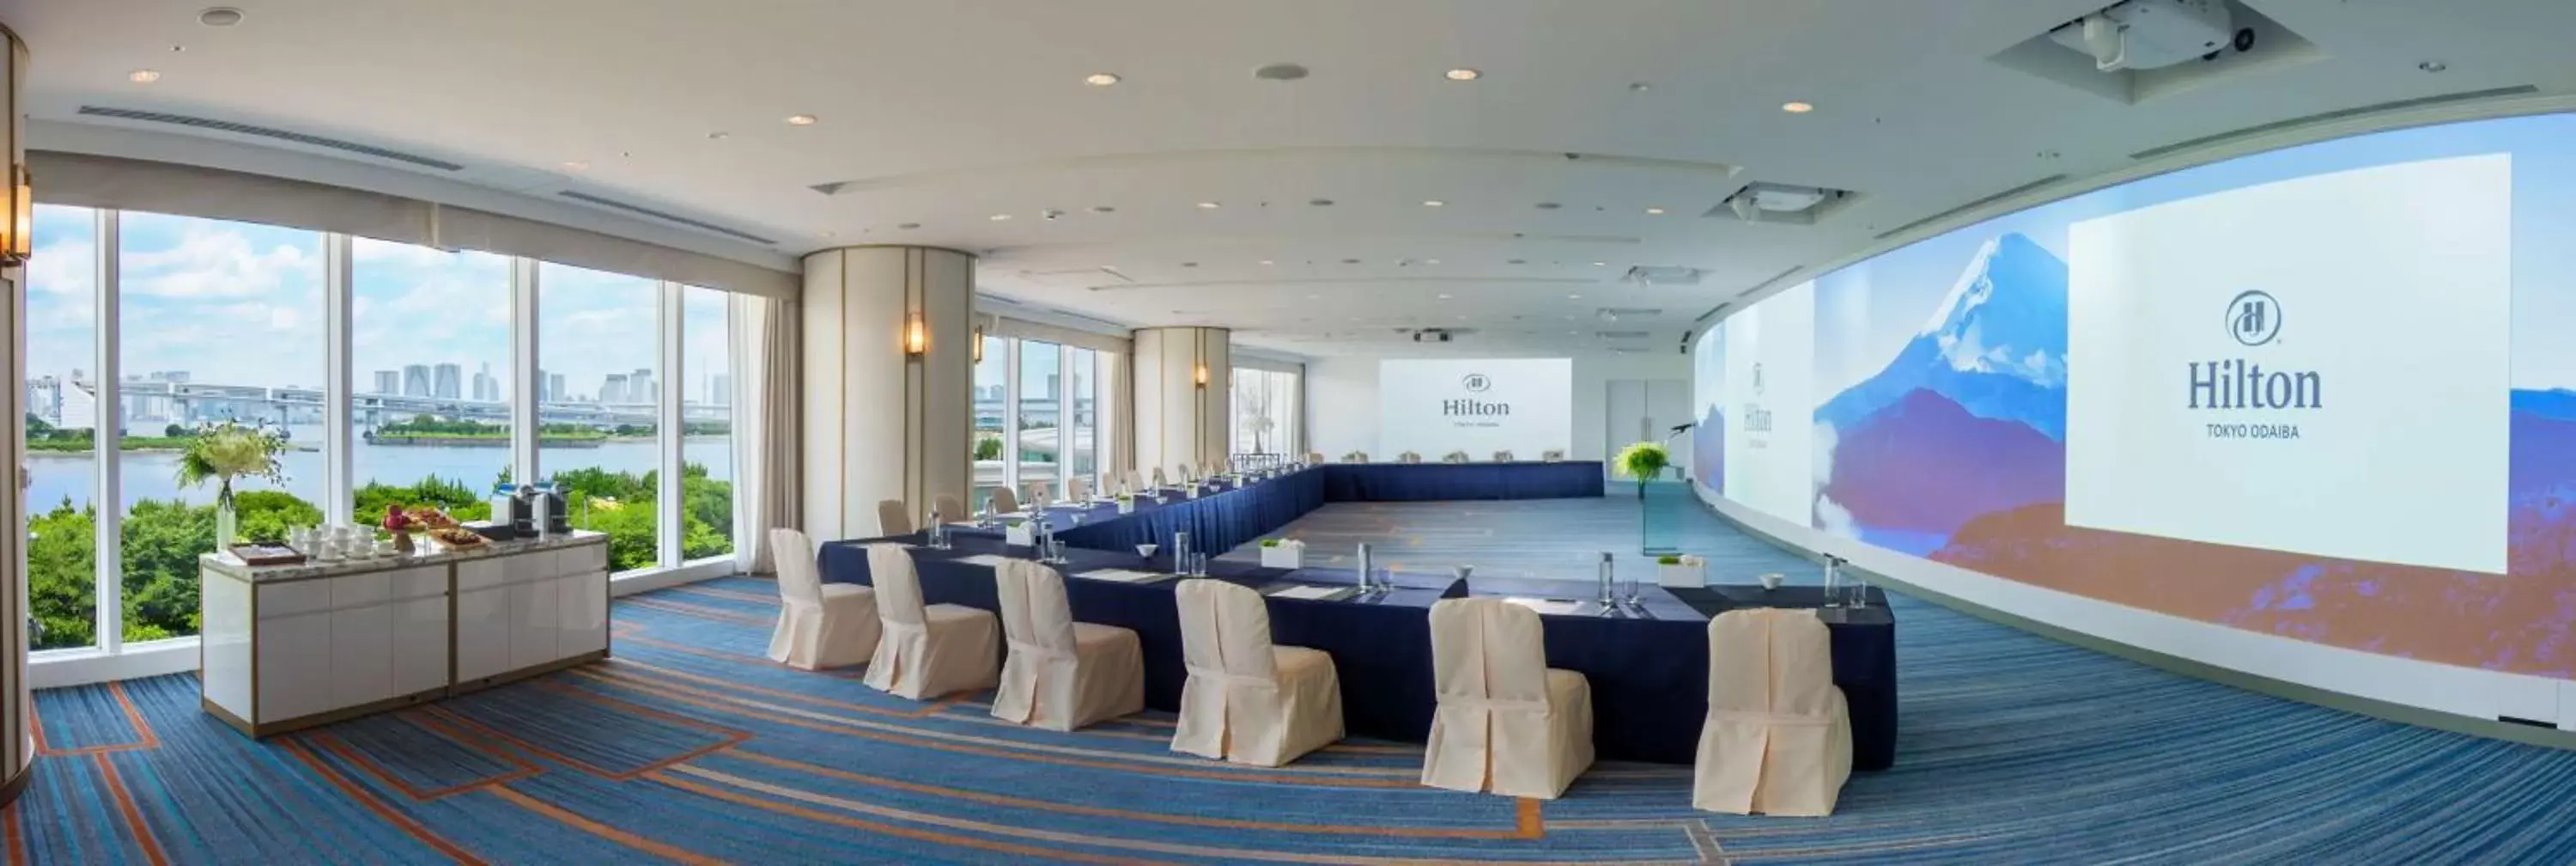 Meeting/conference room in Hilton Tokyo Odaiba